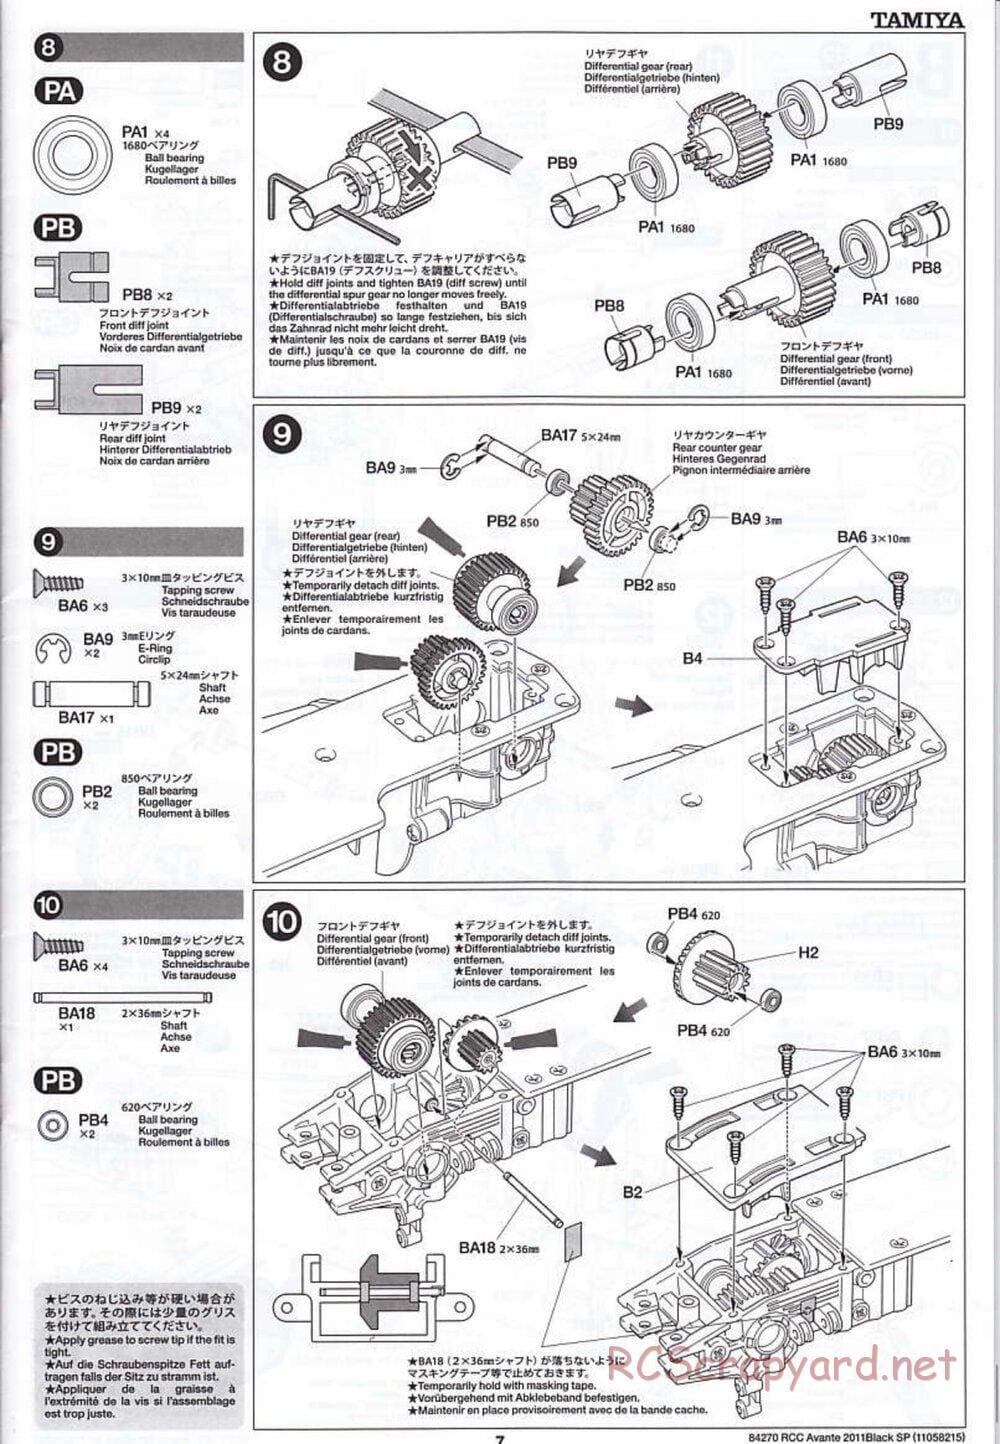 Tamiya - Avante 2011 - Black Special Chassis - Manual - Page 7